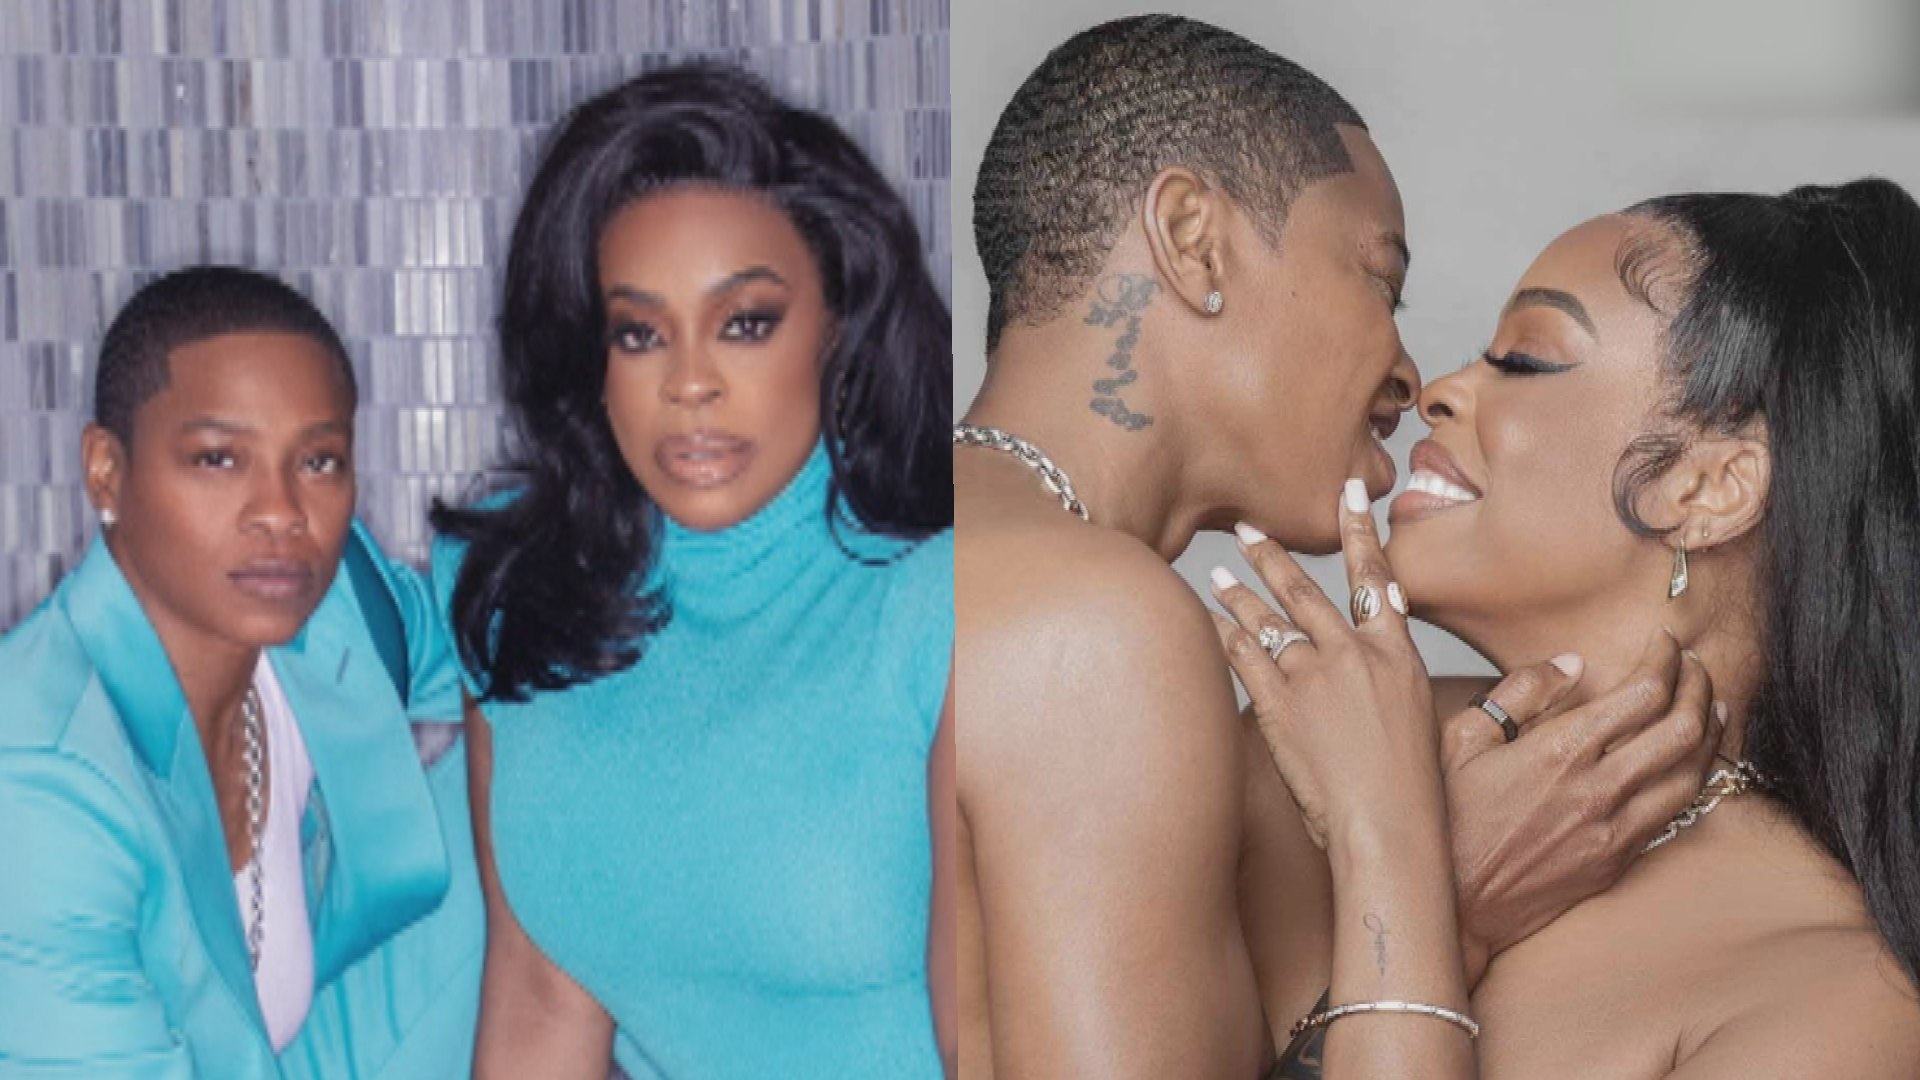 alice hightower recommends niecy nash nude pic